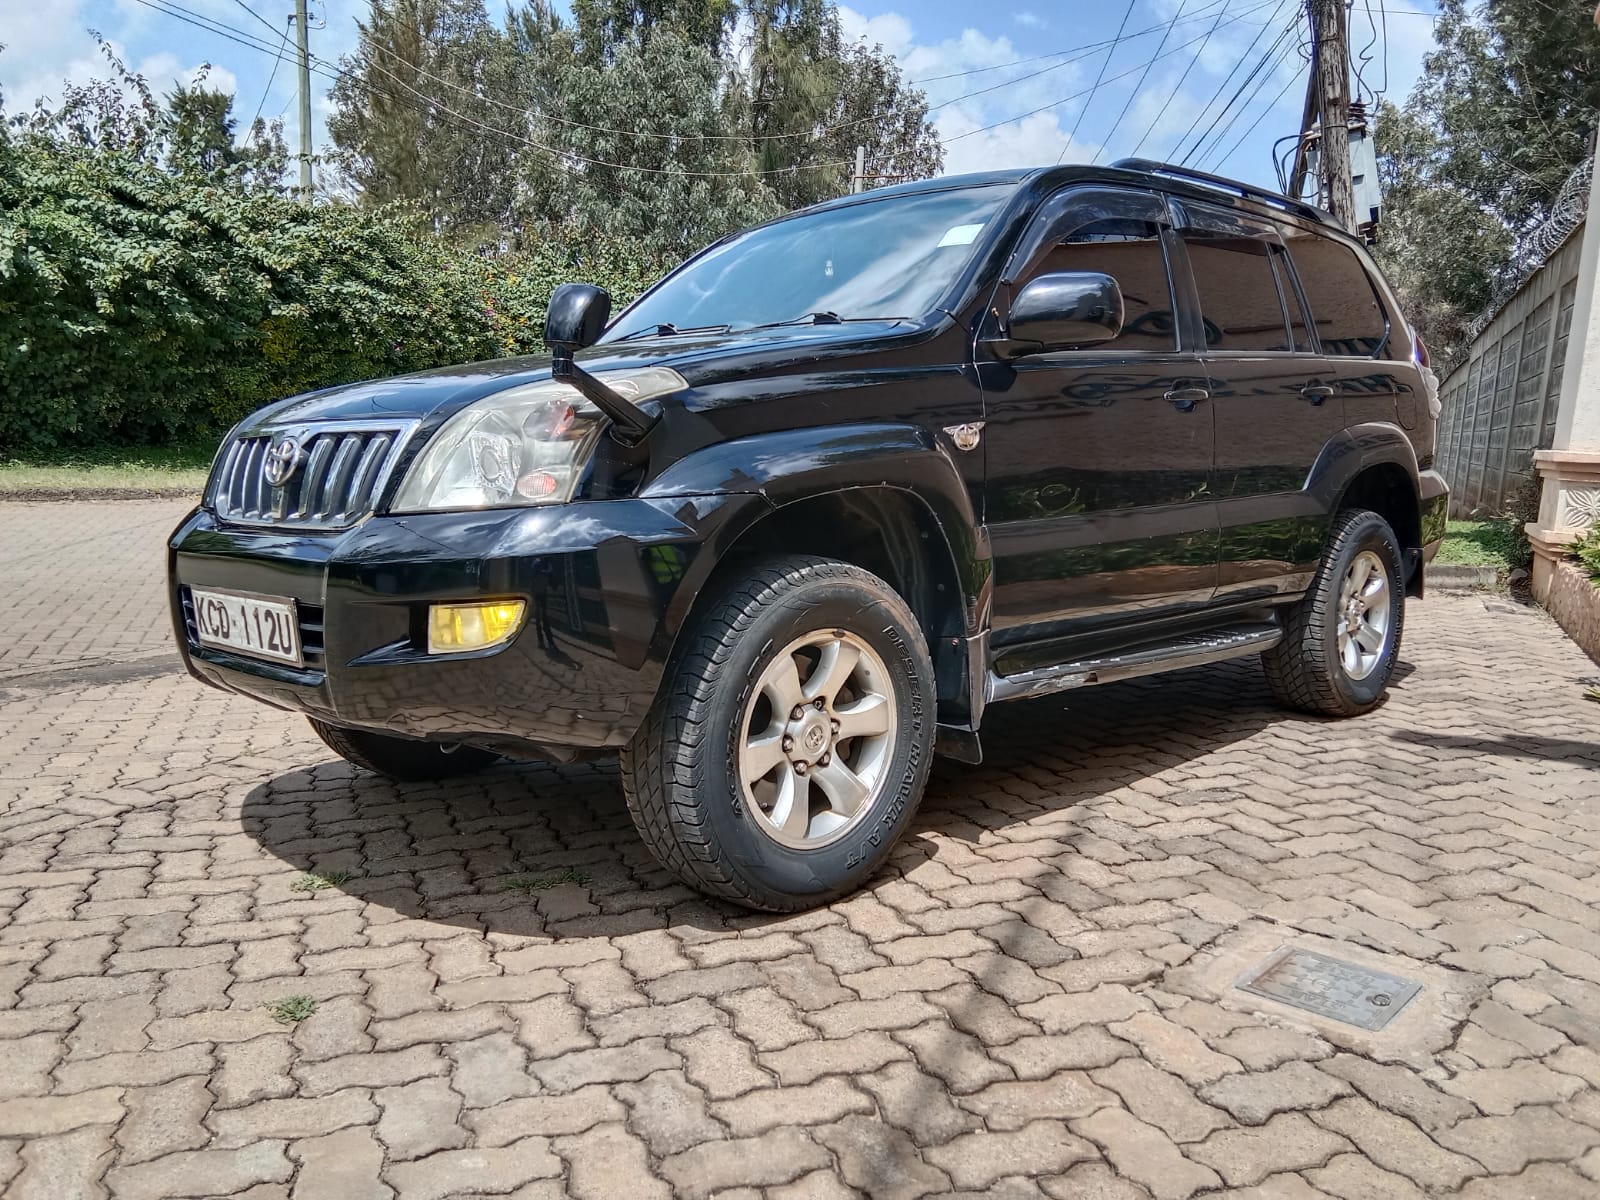 Cars Cars For Sale/Vehicles SUV-Toyota Prado 2008 petrol Pay 20% Offer New 2